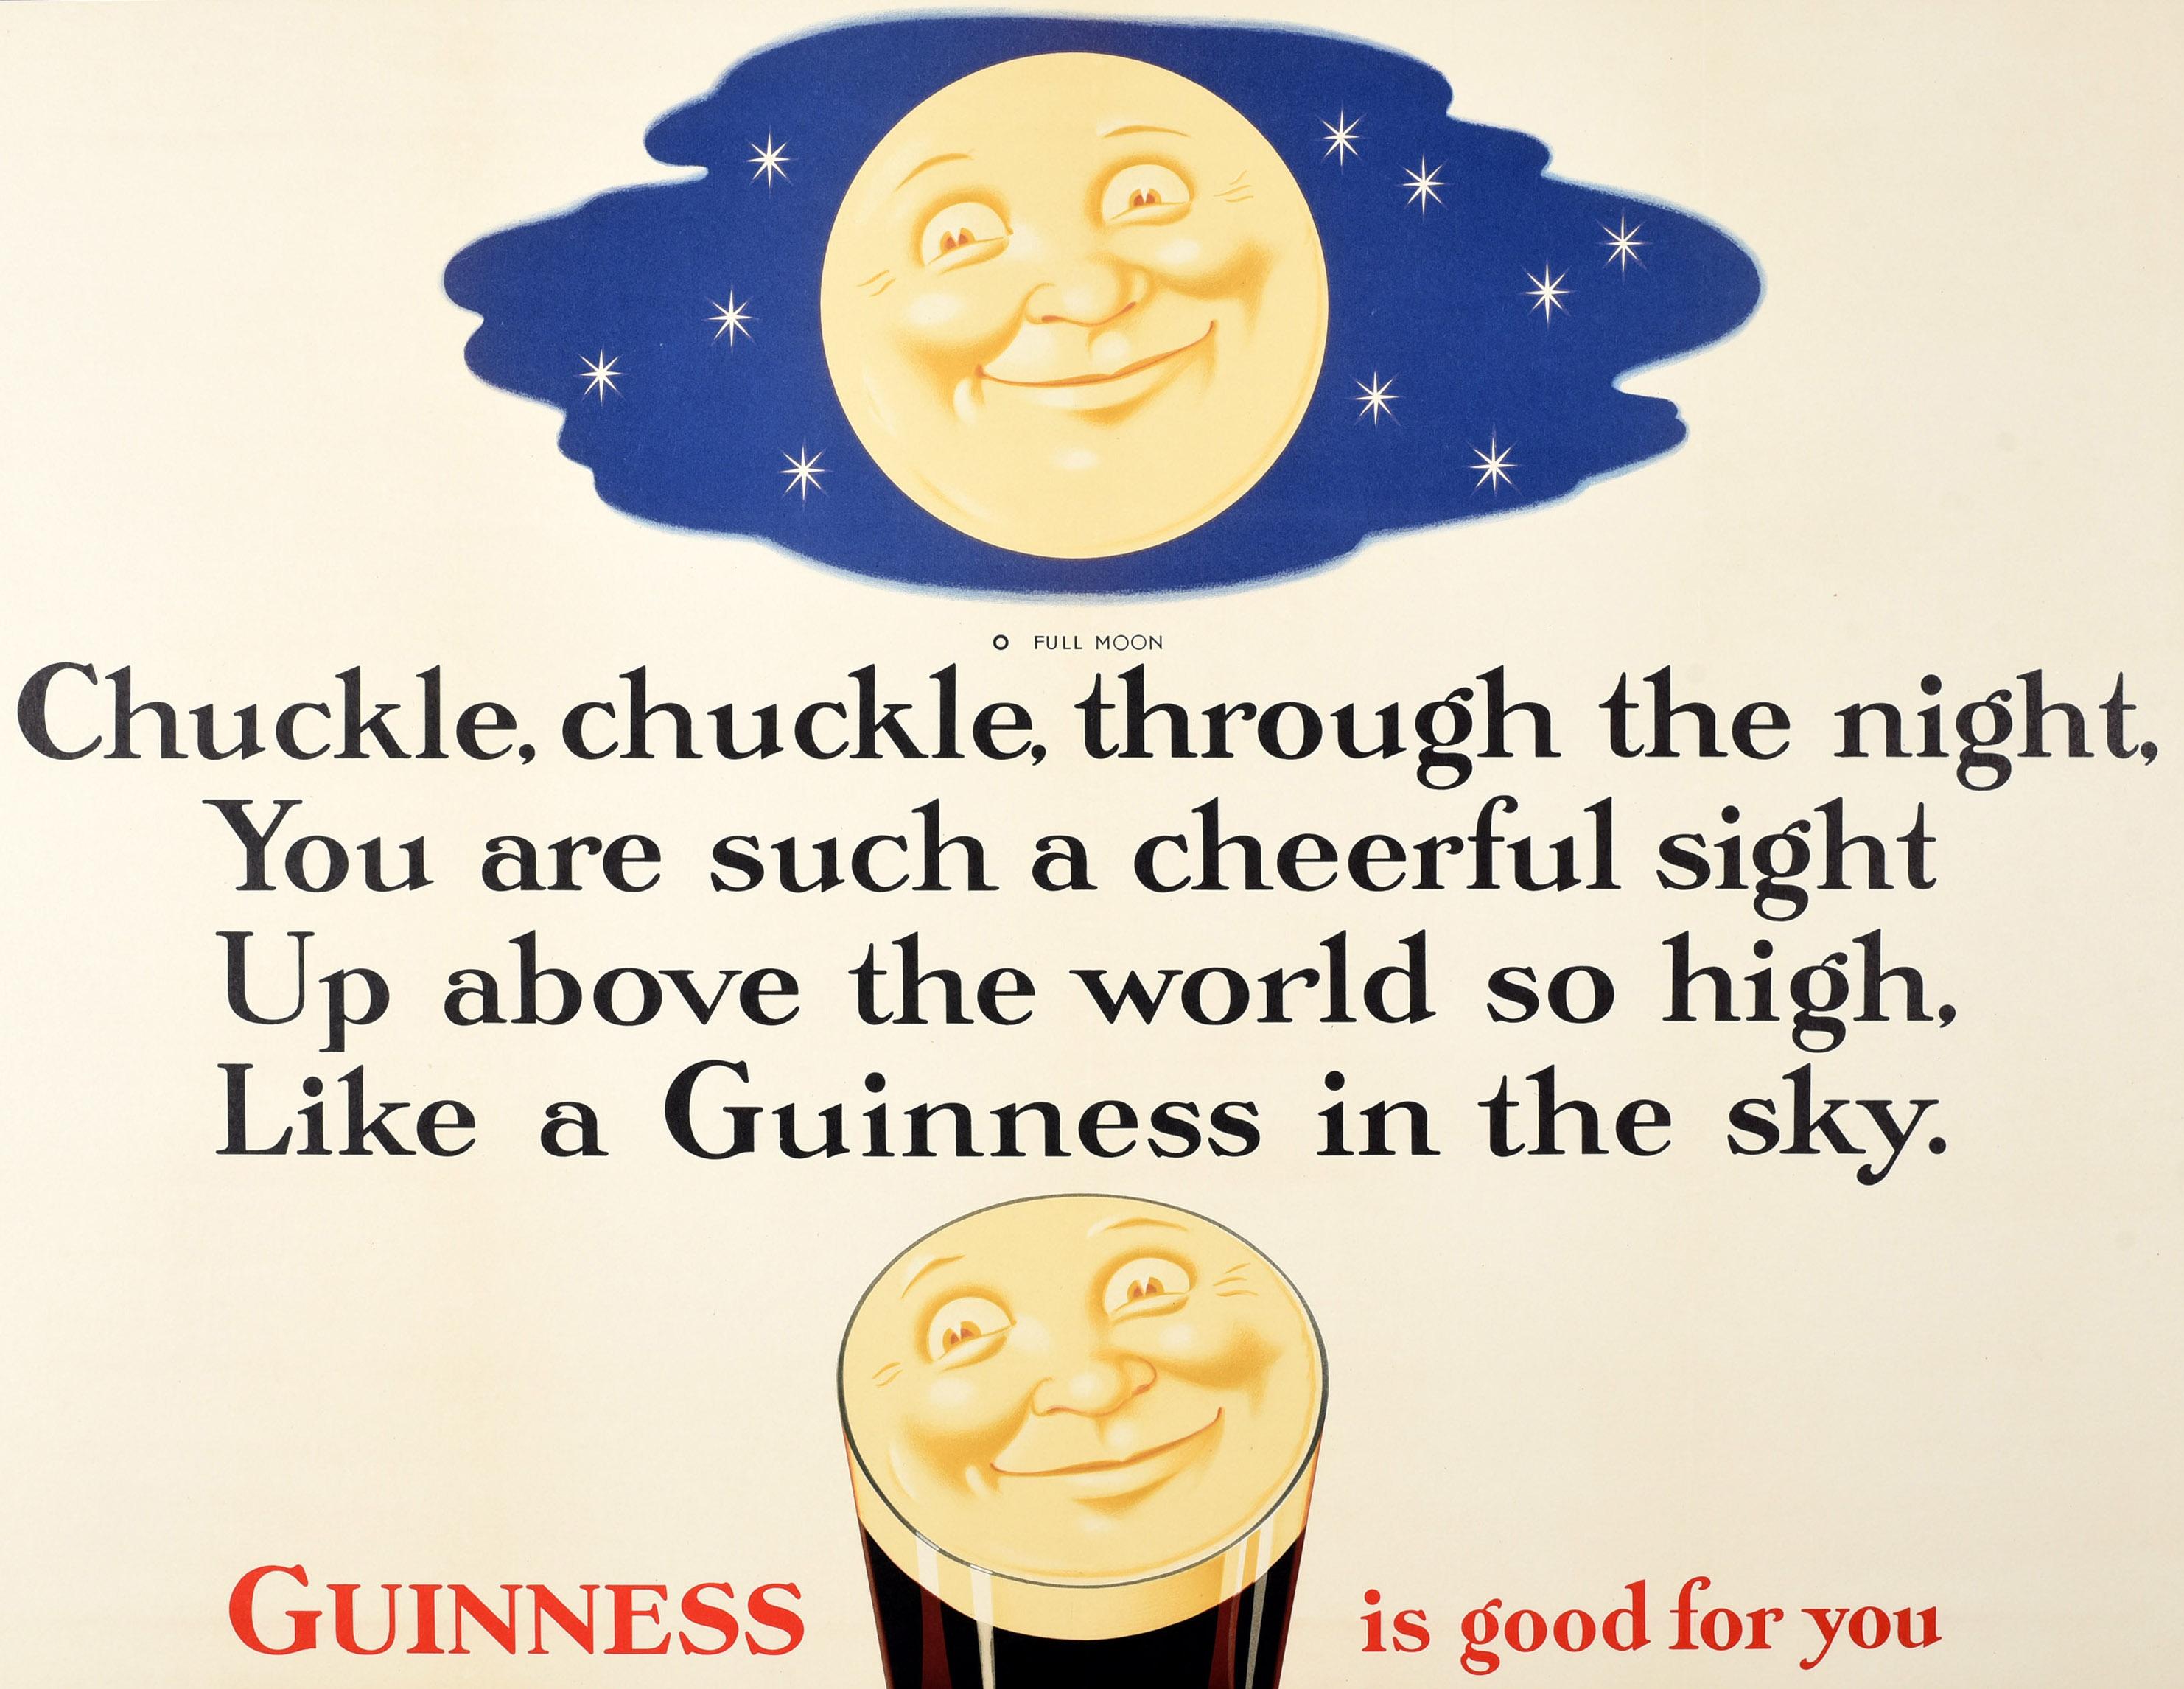 Original vintage drink advertising poster - Guinness is Good for You - featuring a fun and colourful cartoon style image of the iconic smiling Guinness face reflected from the top of a pint glass with a smiling moon in a starry night sky above, the